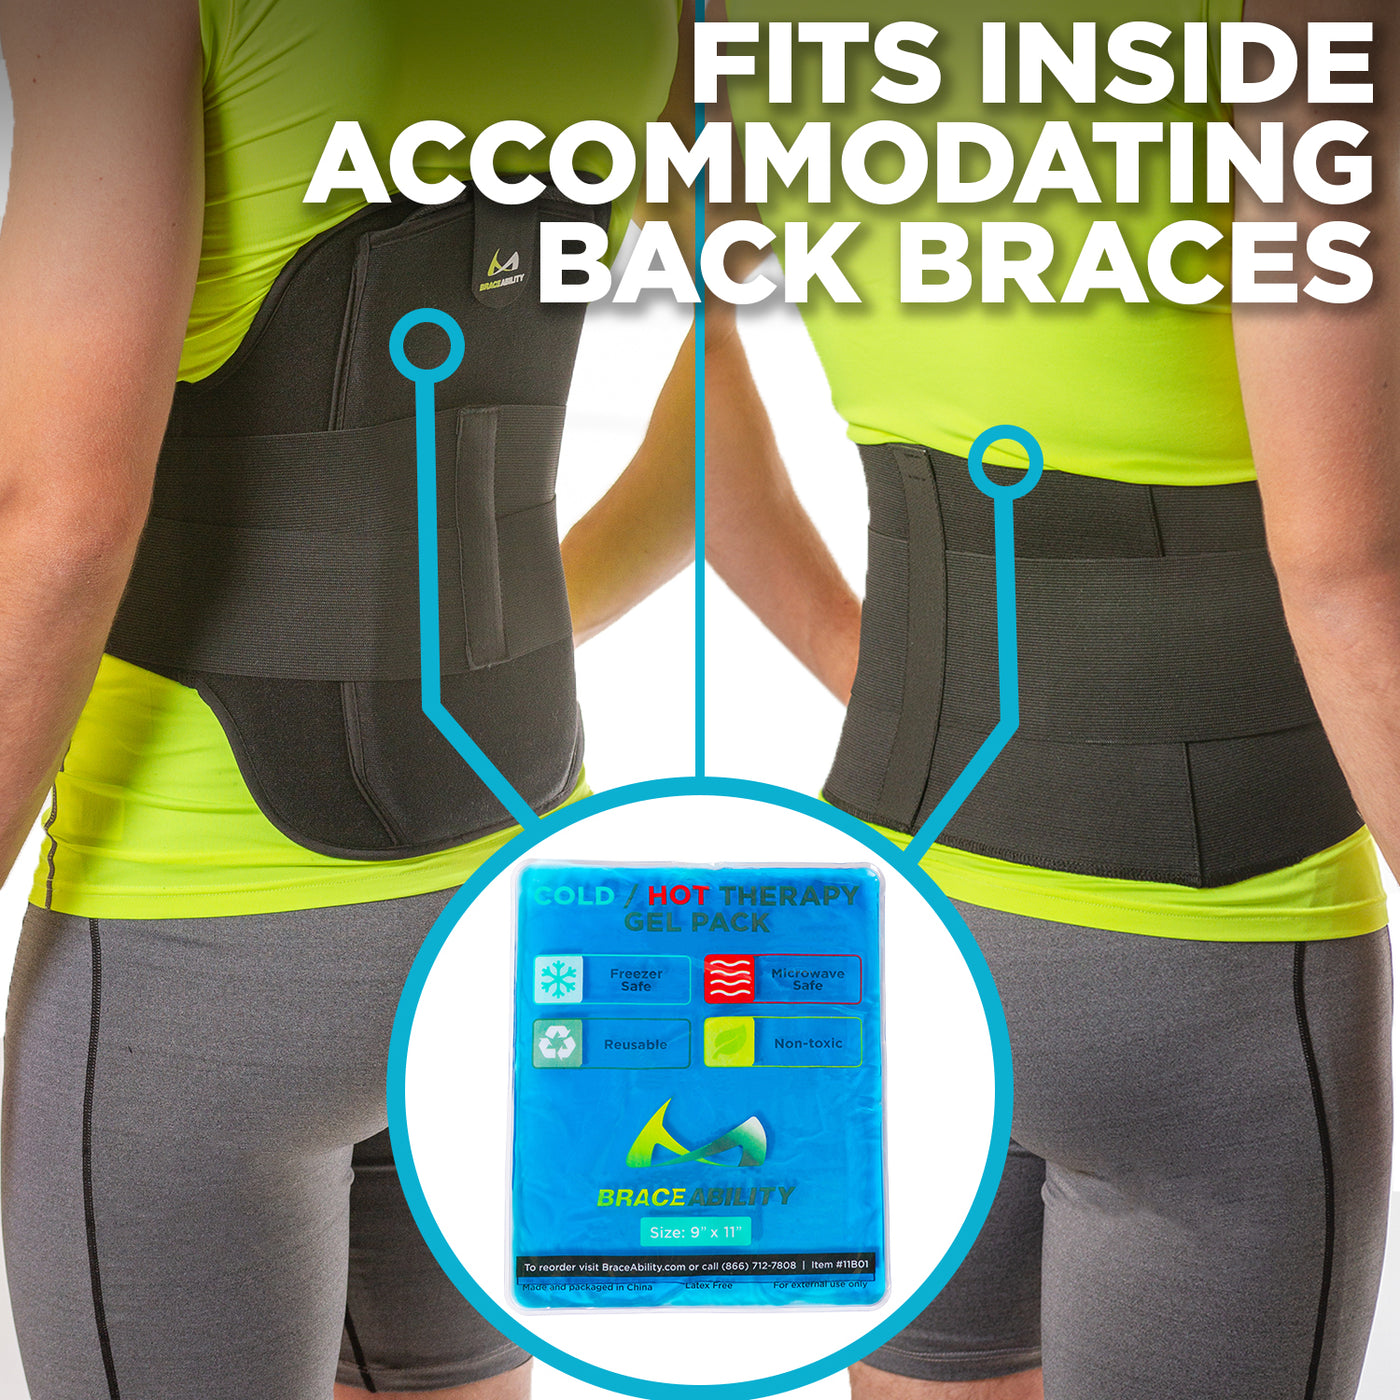 hot and cold compression pack fits into back braces for support